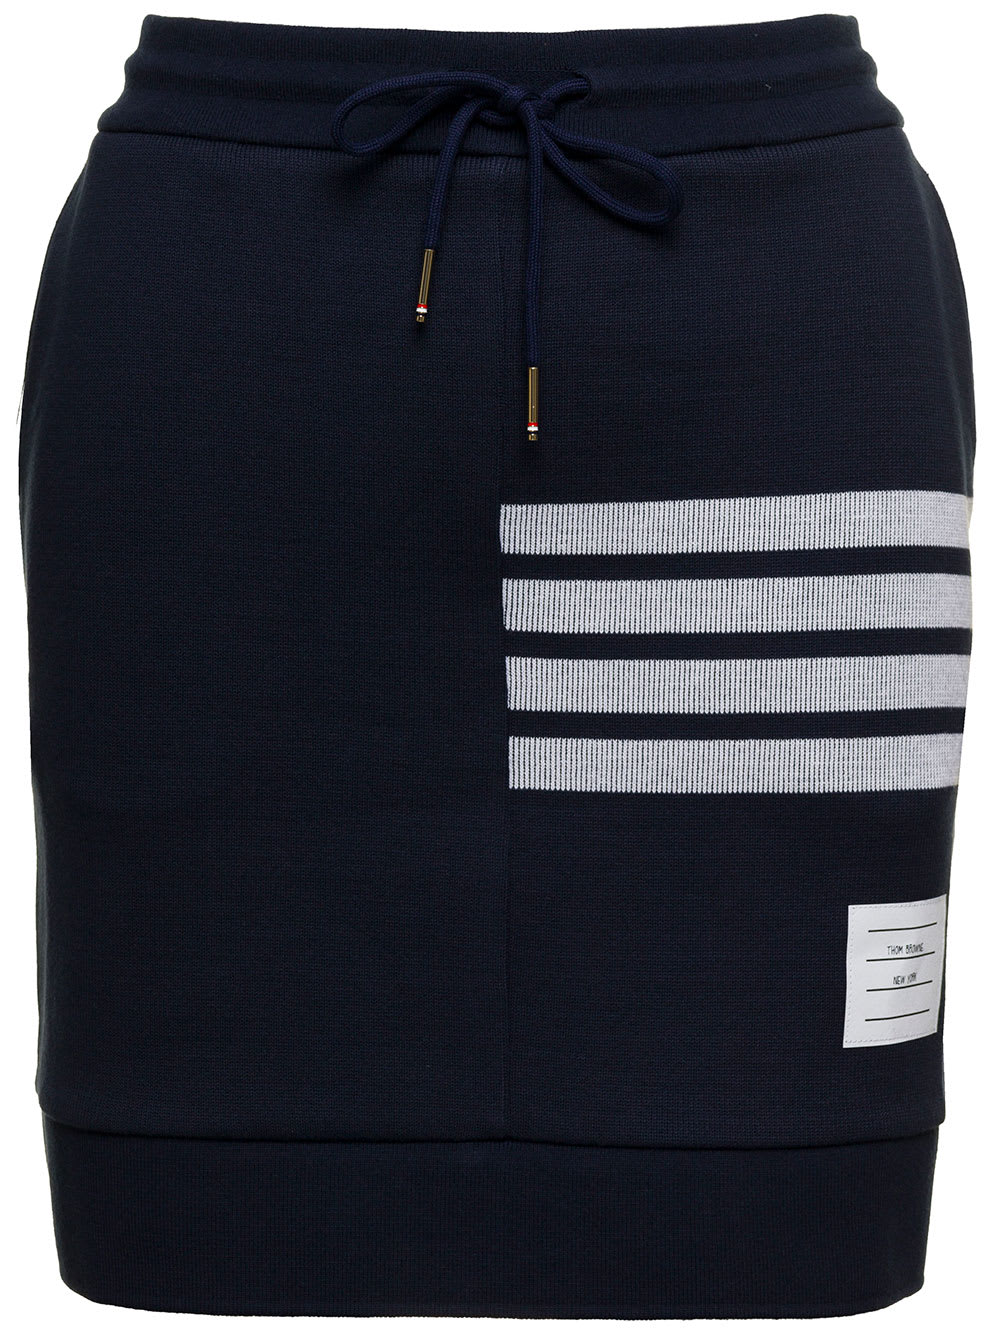 THOM BROWNE BLUE SACK SKIRT WITH DRAWSTRING AND STRIPED MOTIF IN COTTON WOMAN